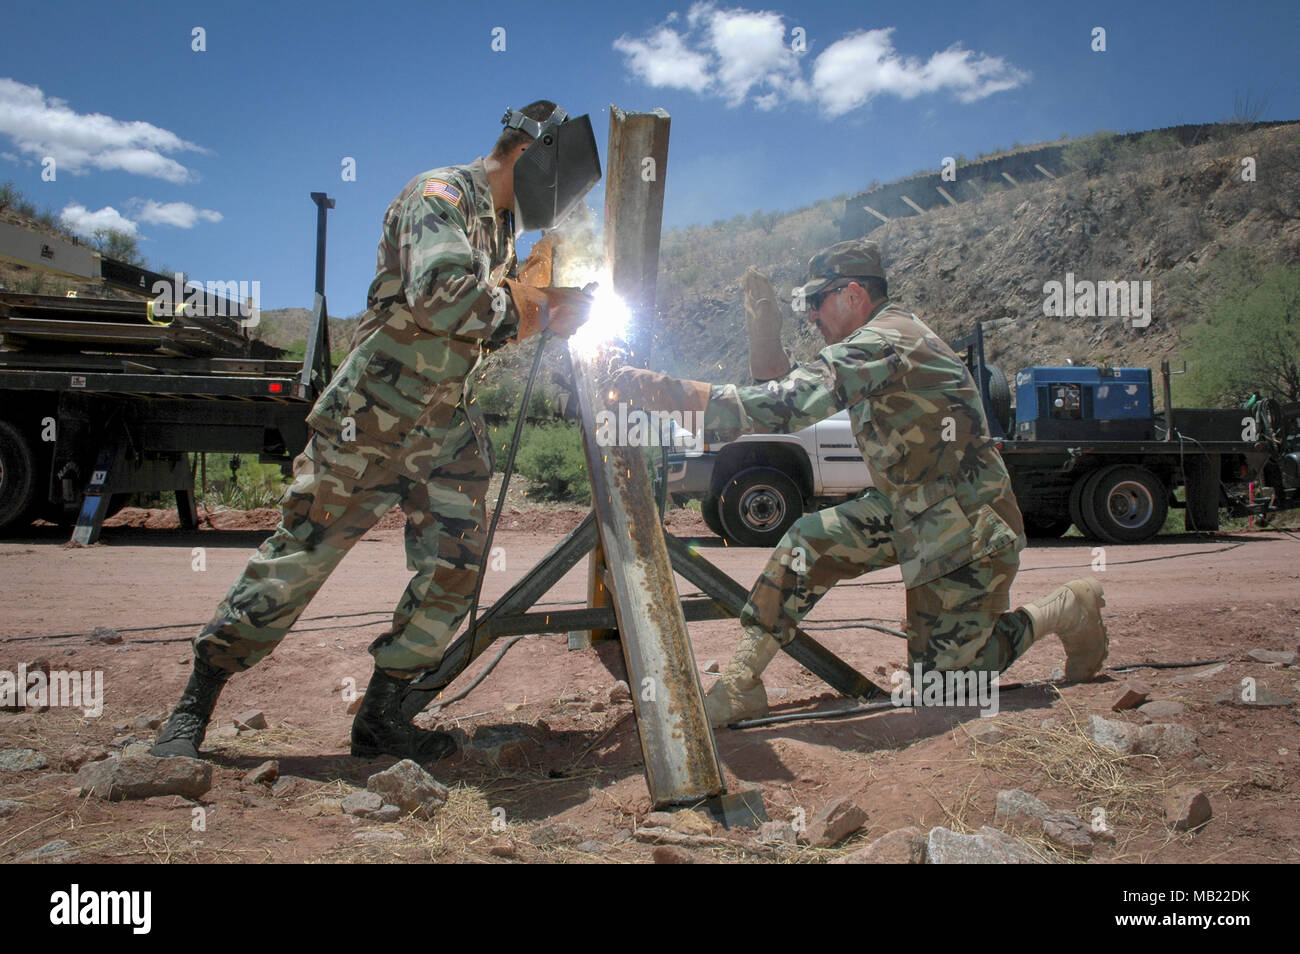 File. 4th Apr, 2018. President Trump will issue a proclamation on Wednesday directing the Department of Defense and the Department of Homeland Security to work with governors to deploy National Guard troops to the southwest border to assist the Border Patrol in combating illegal immigration. PICTURED: July 5, 2006 - Nogales, Arizona, USA - Arizona Army National Guard specialist RUBEN CORDOVA, left welds together a vehicle barrier while Sgt. first class GUSTAVO DAGINO holds the pieces in place near the US-Mexico border in Nogales, Ariz., July 5, 2006. The used railroad rails prevent vehicles Stock Photo